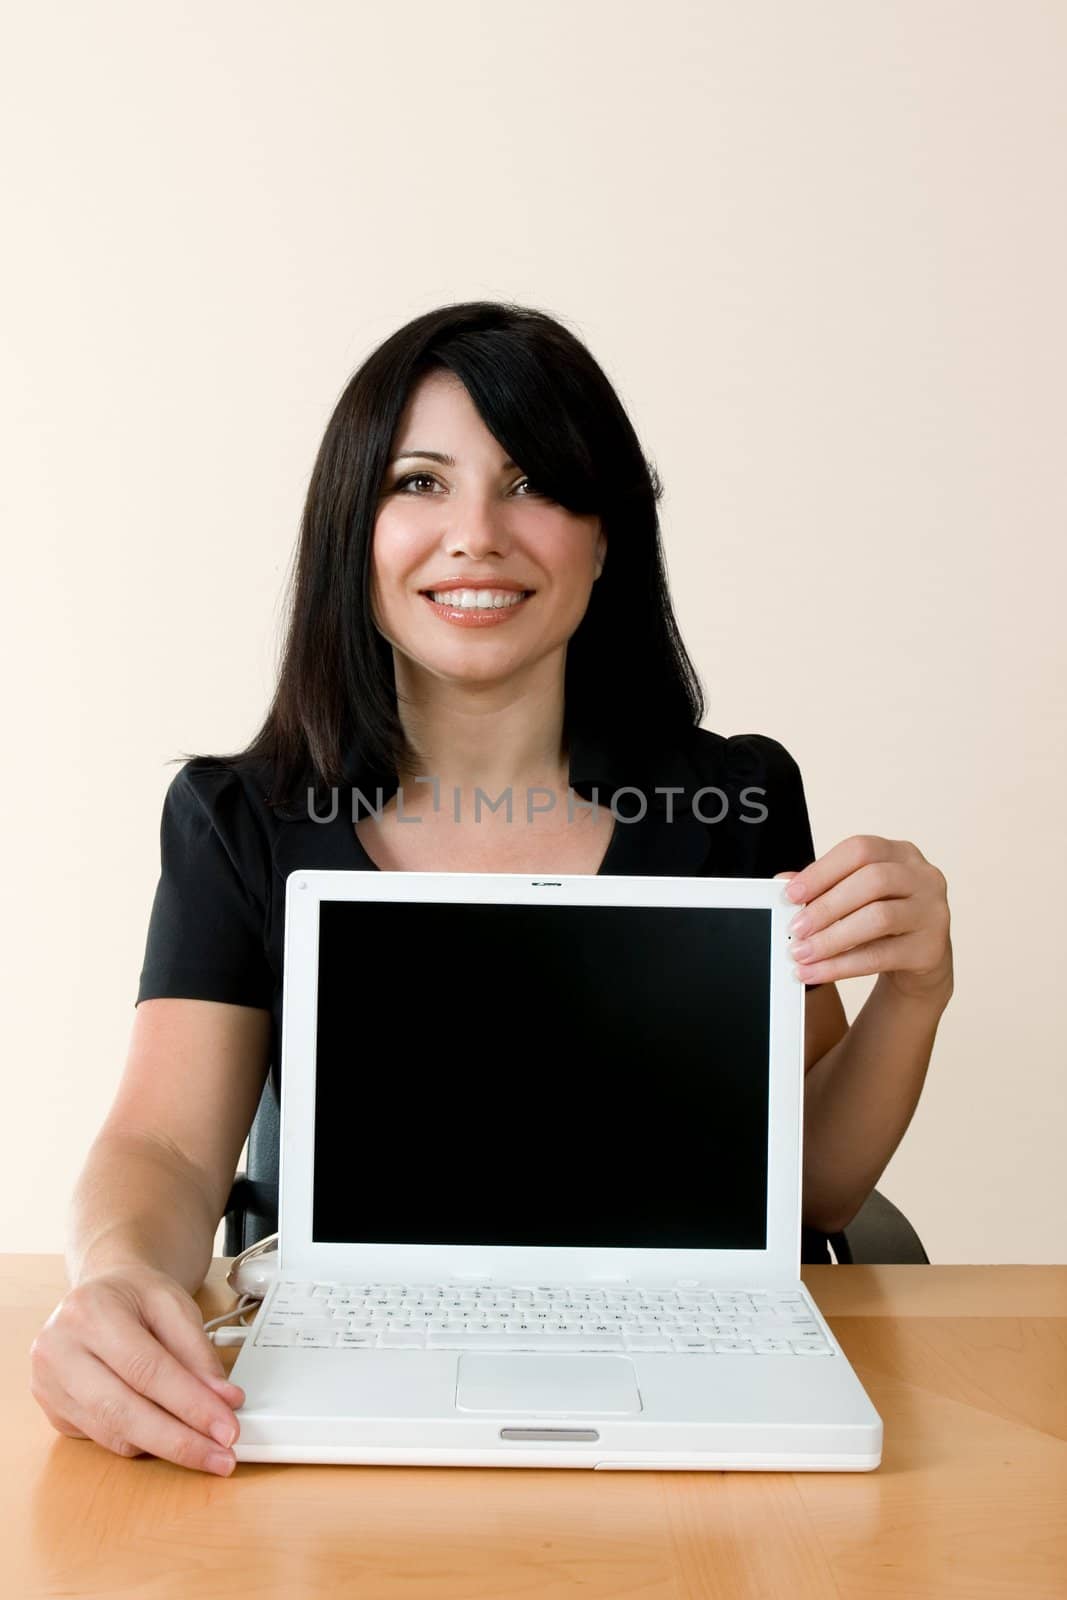 Smiling woman with laptop computer